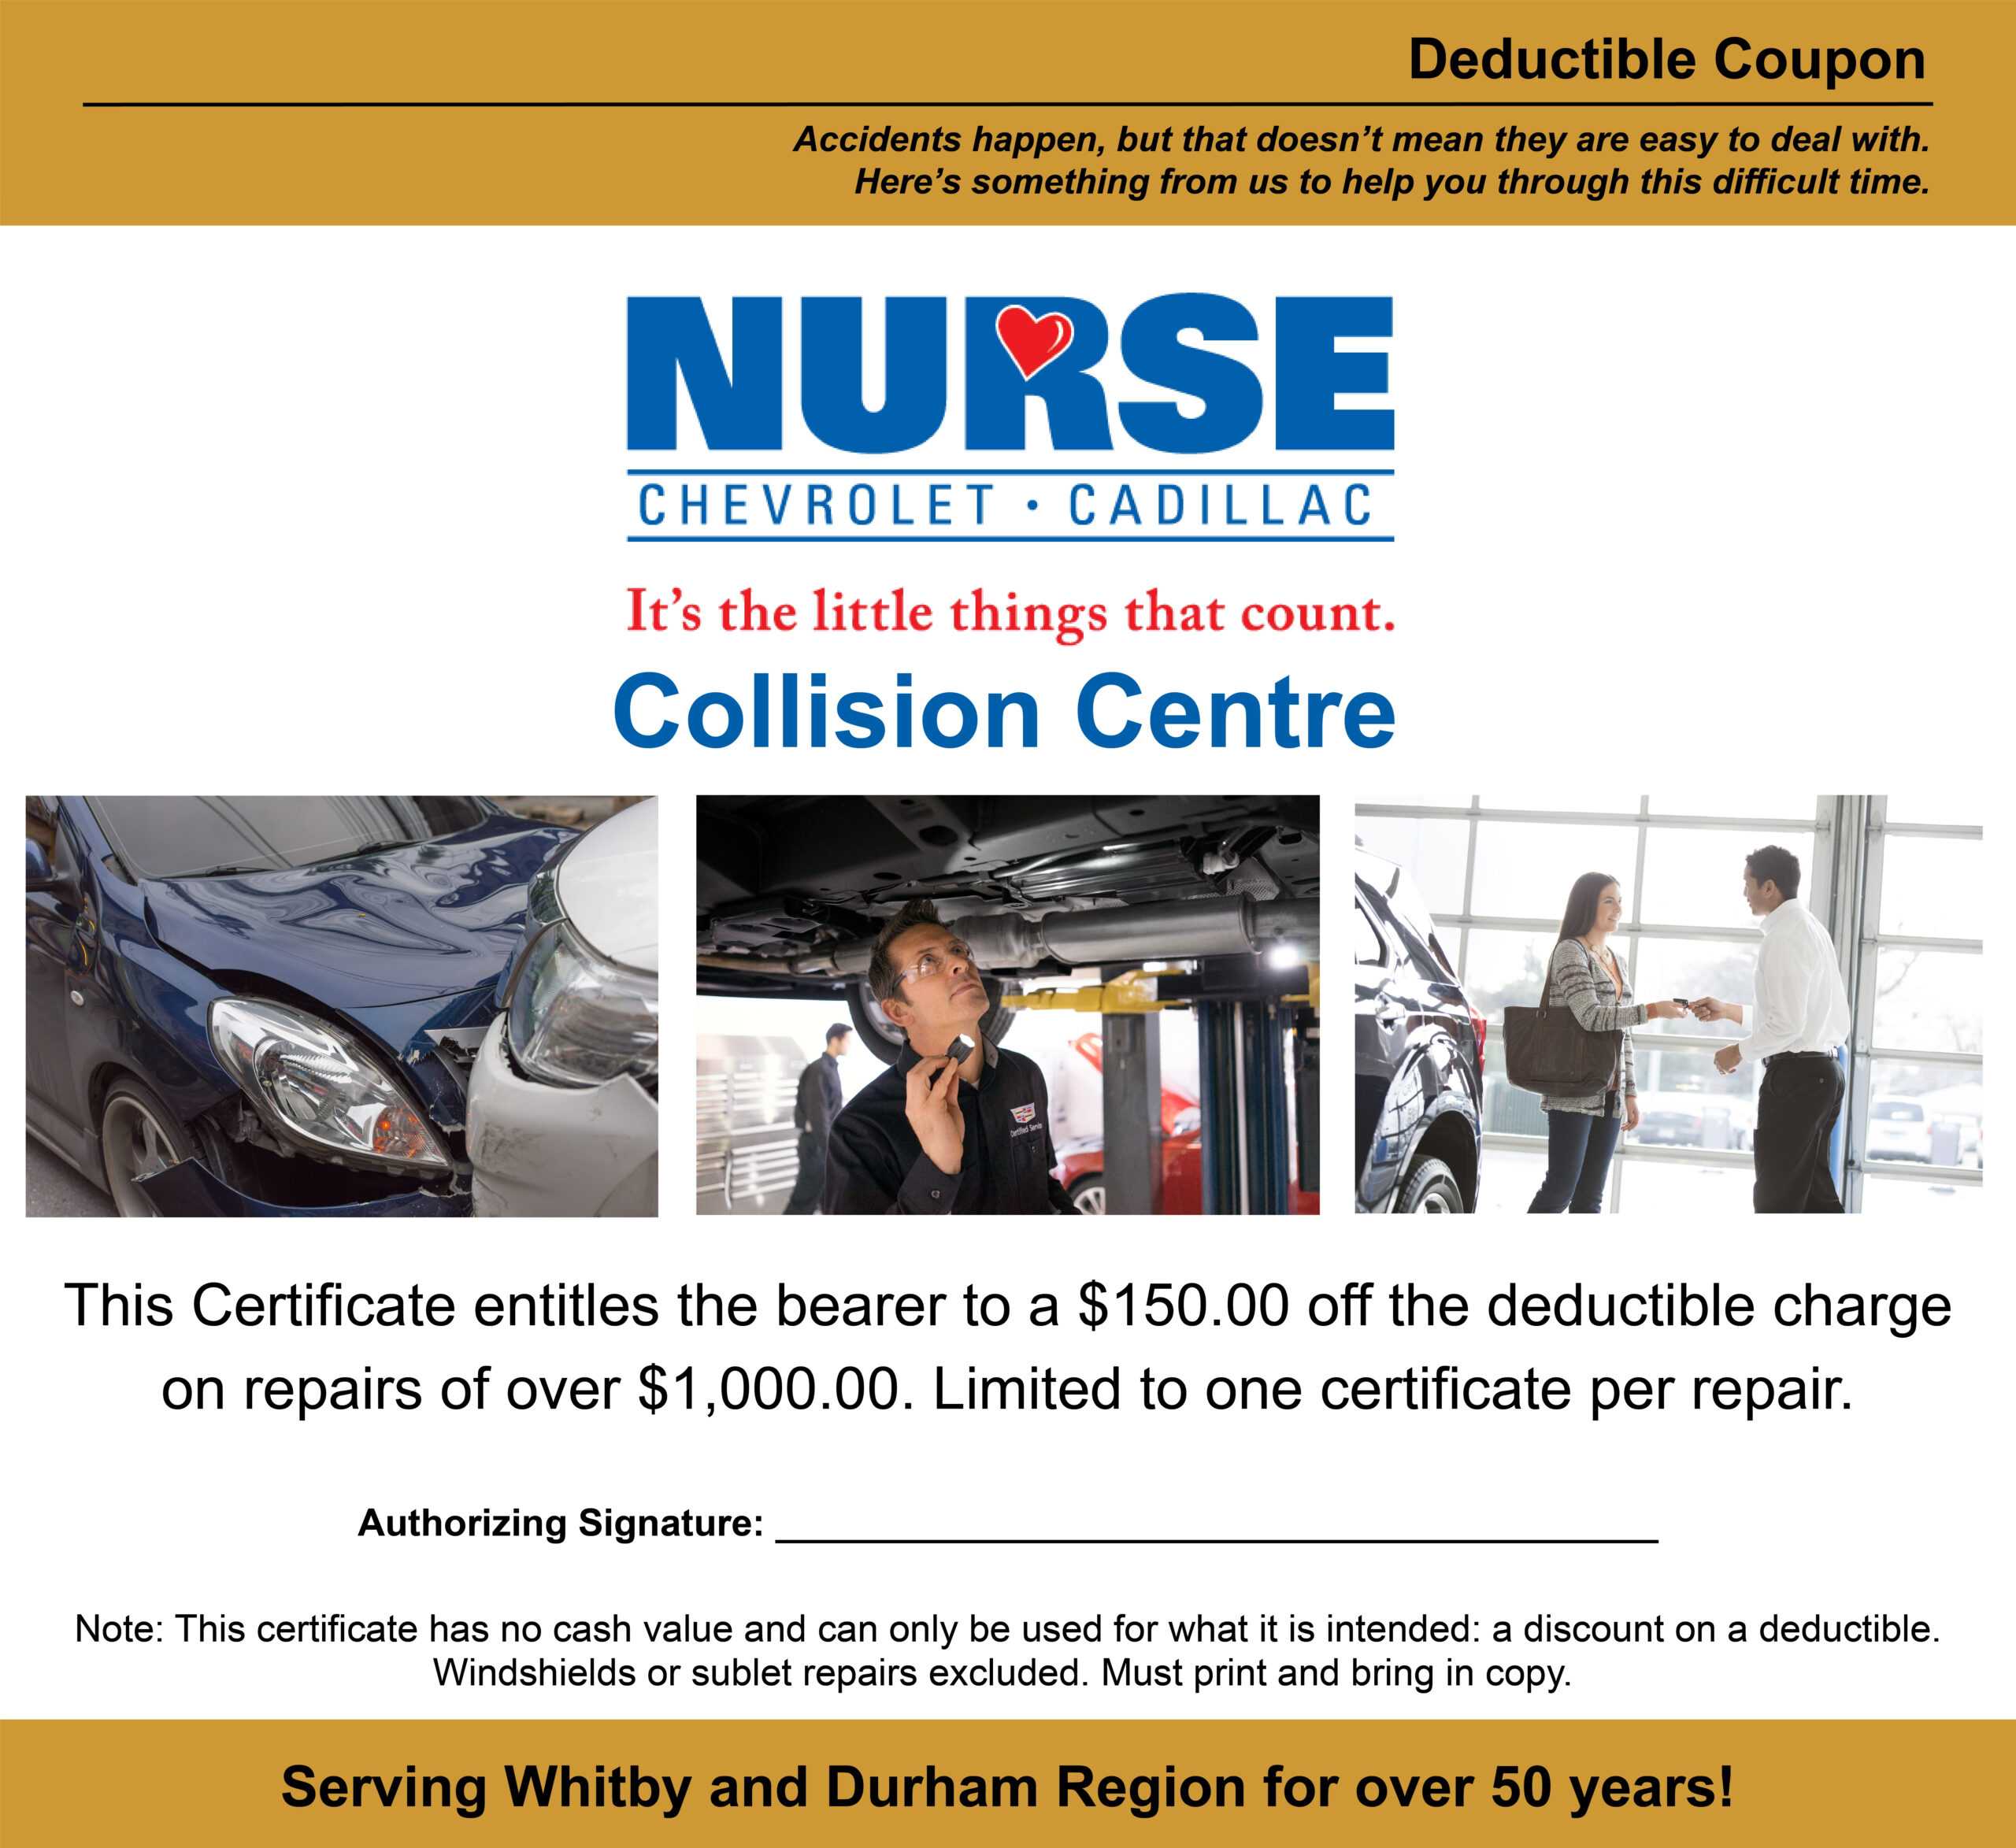 Exclusive Offers | Nurse Chevrolet Cadillac Within This Certificate Entitles The Bearer To Template